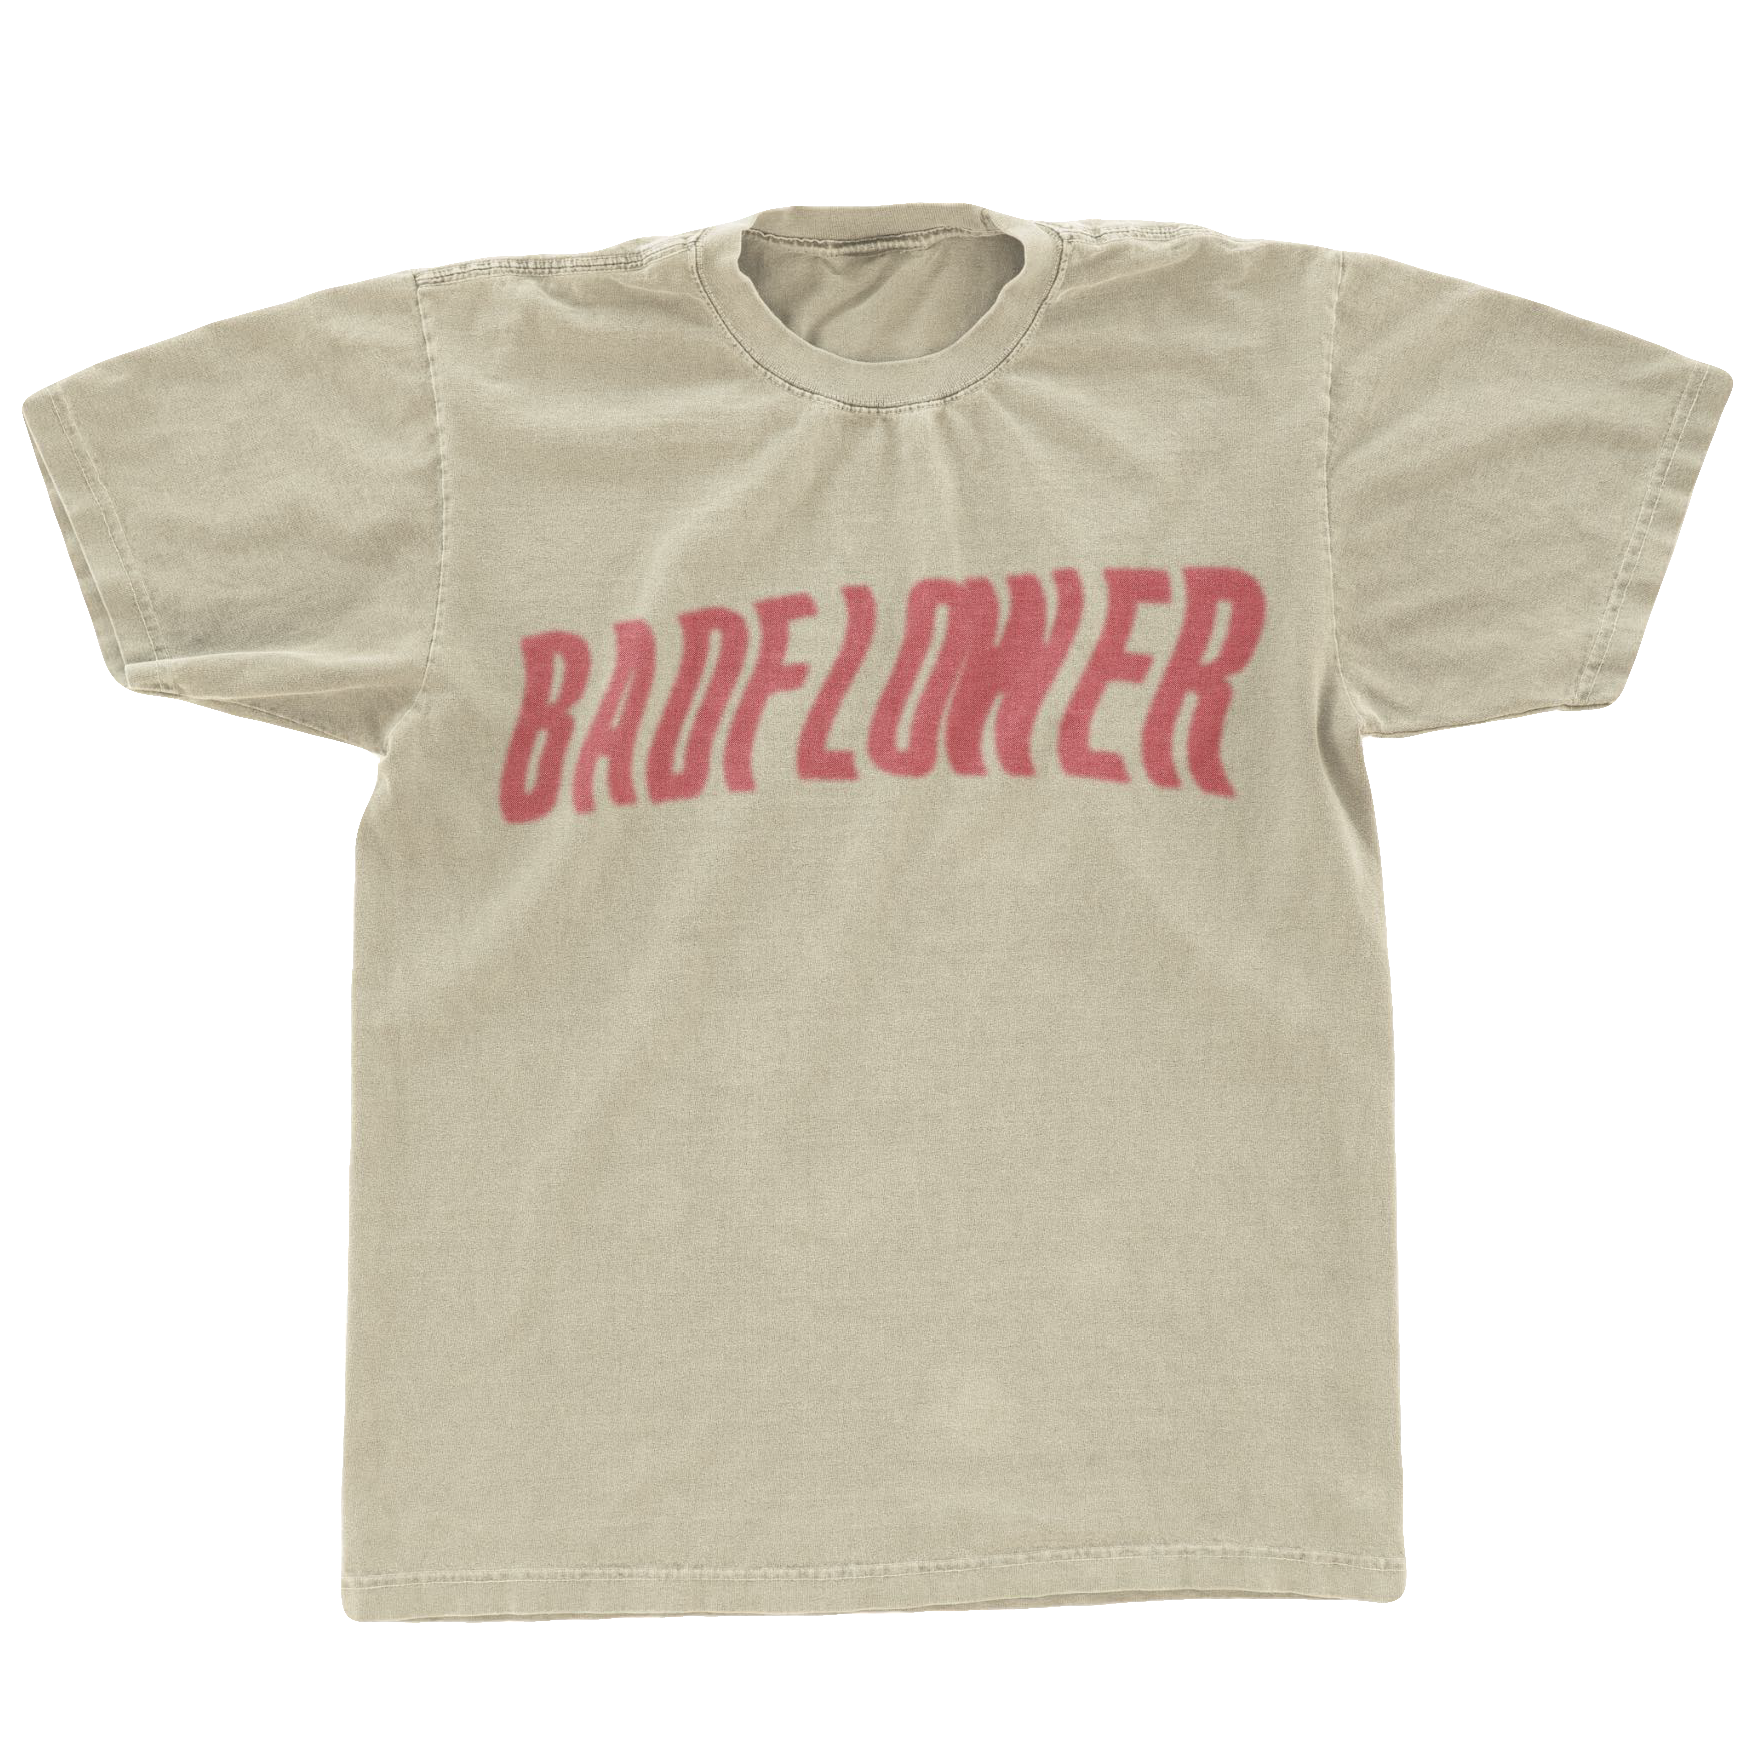 Tan tee shirt with Badflower written in red across the front